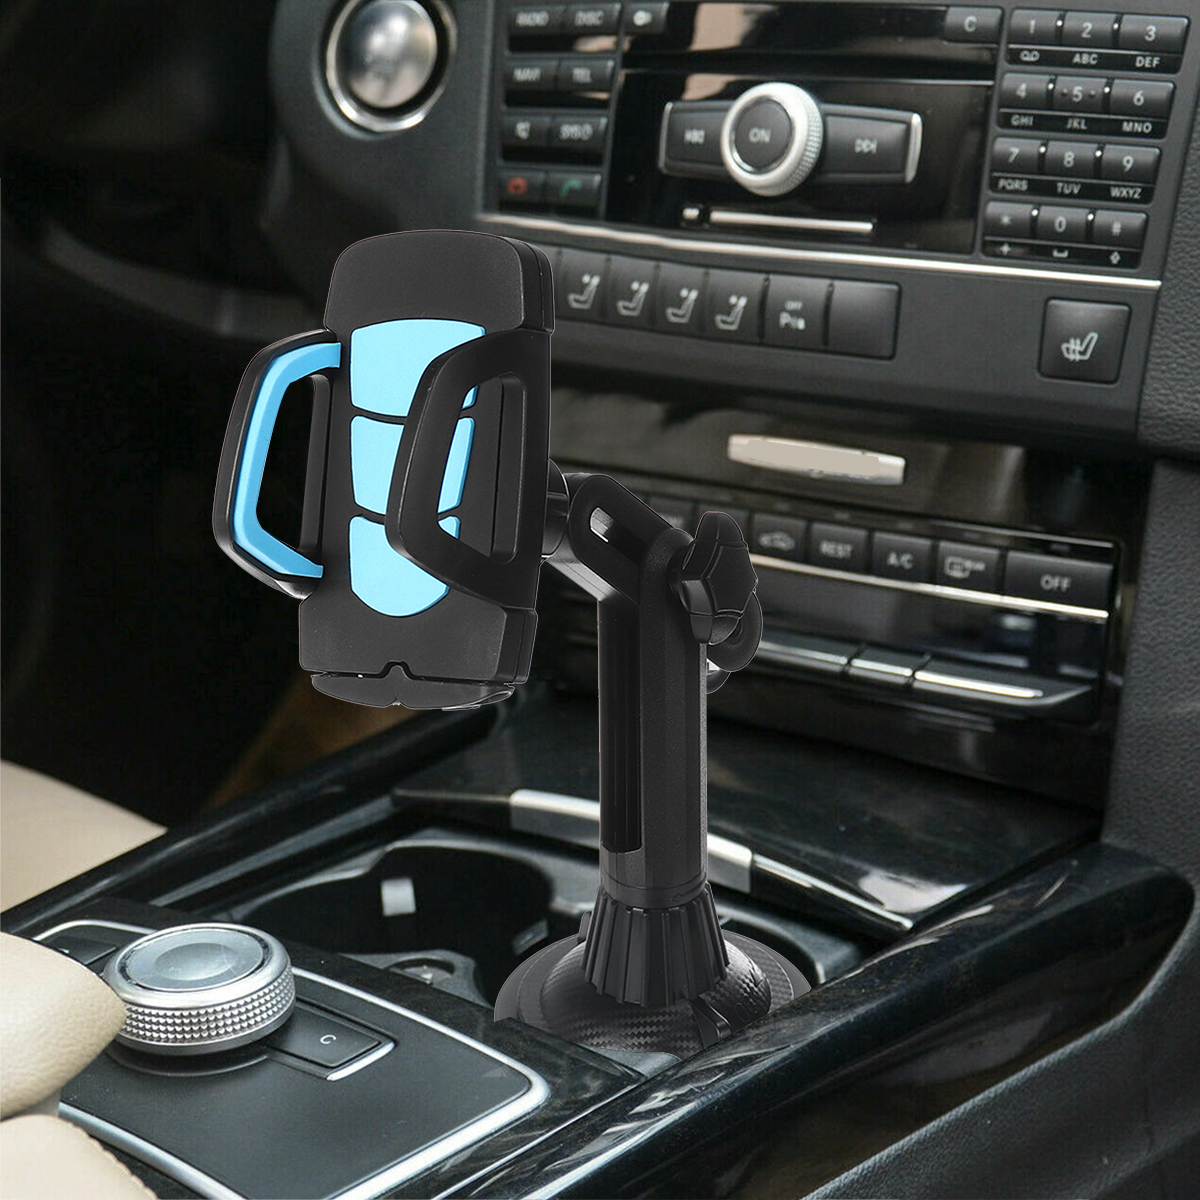 Bakeey-Car-Mount-360deg-Adjustable-Cup-Holder-Cradle-for-iPhone-12-for-Samsung-Galaxy-Note-20-ultra--1778684-10